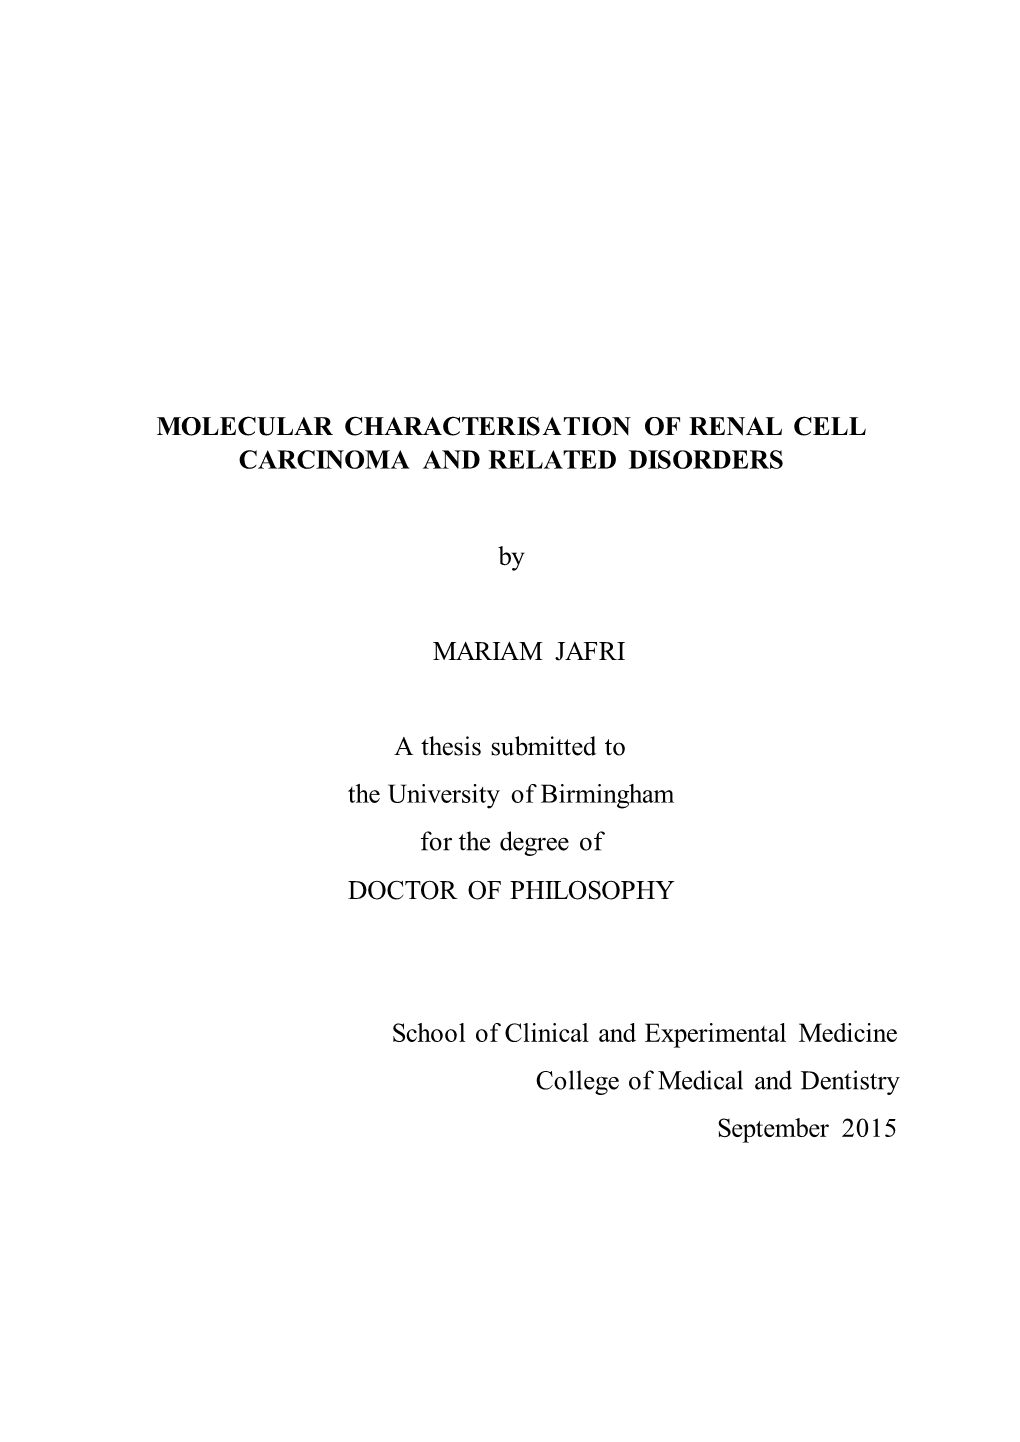 Molecular Characterisation of Renal Cell Carcinoma and Related Disorders